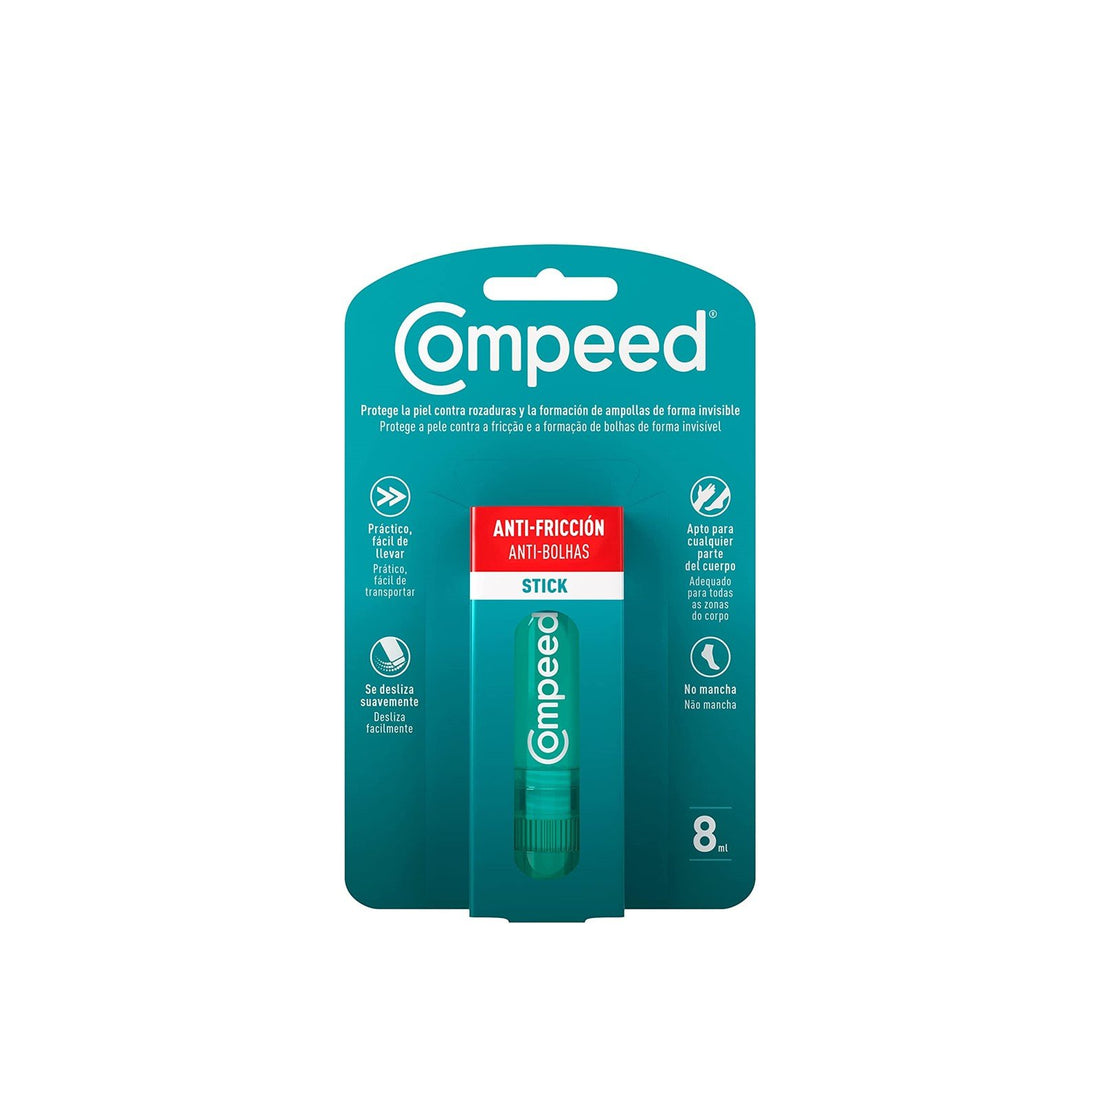 Compeed Stick Anti-Blisters 8ml